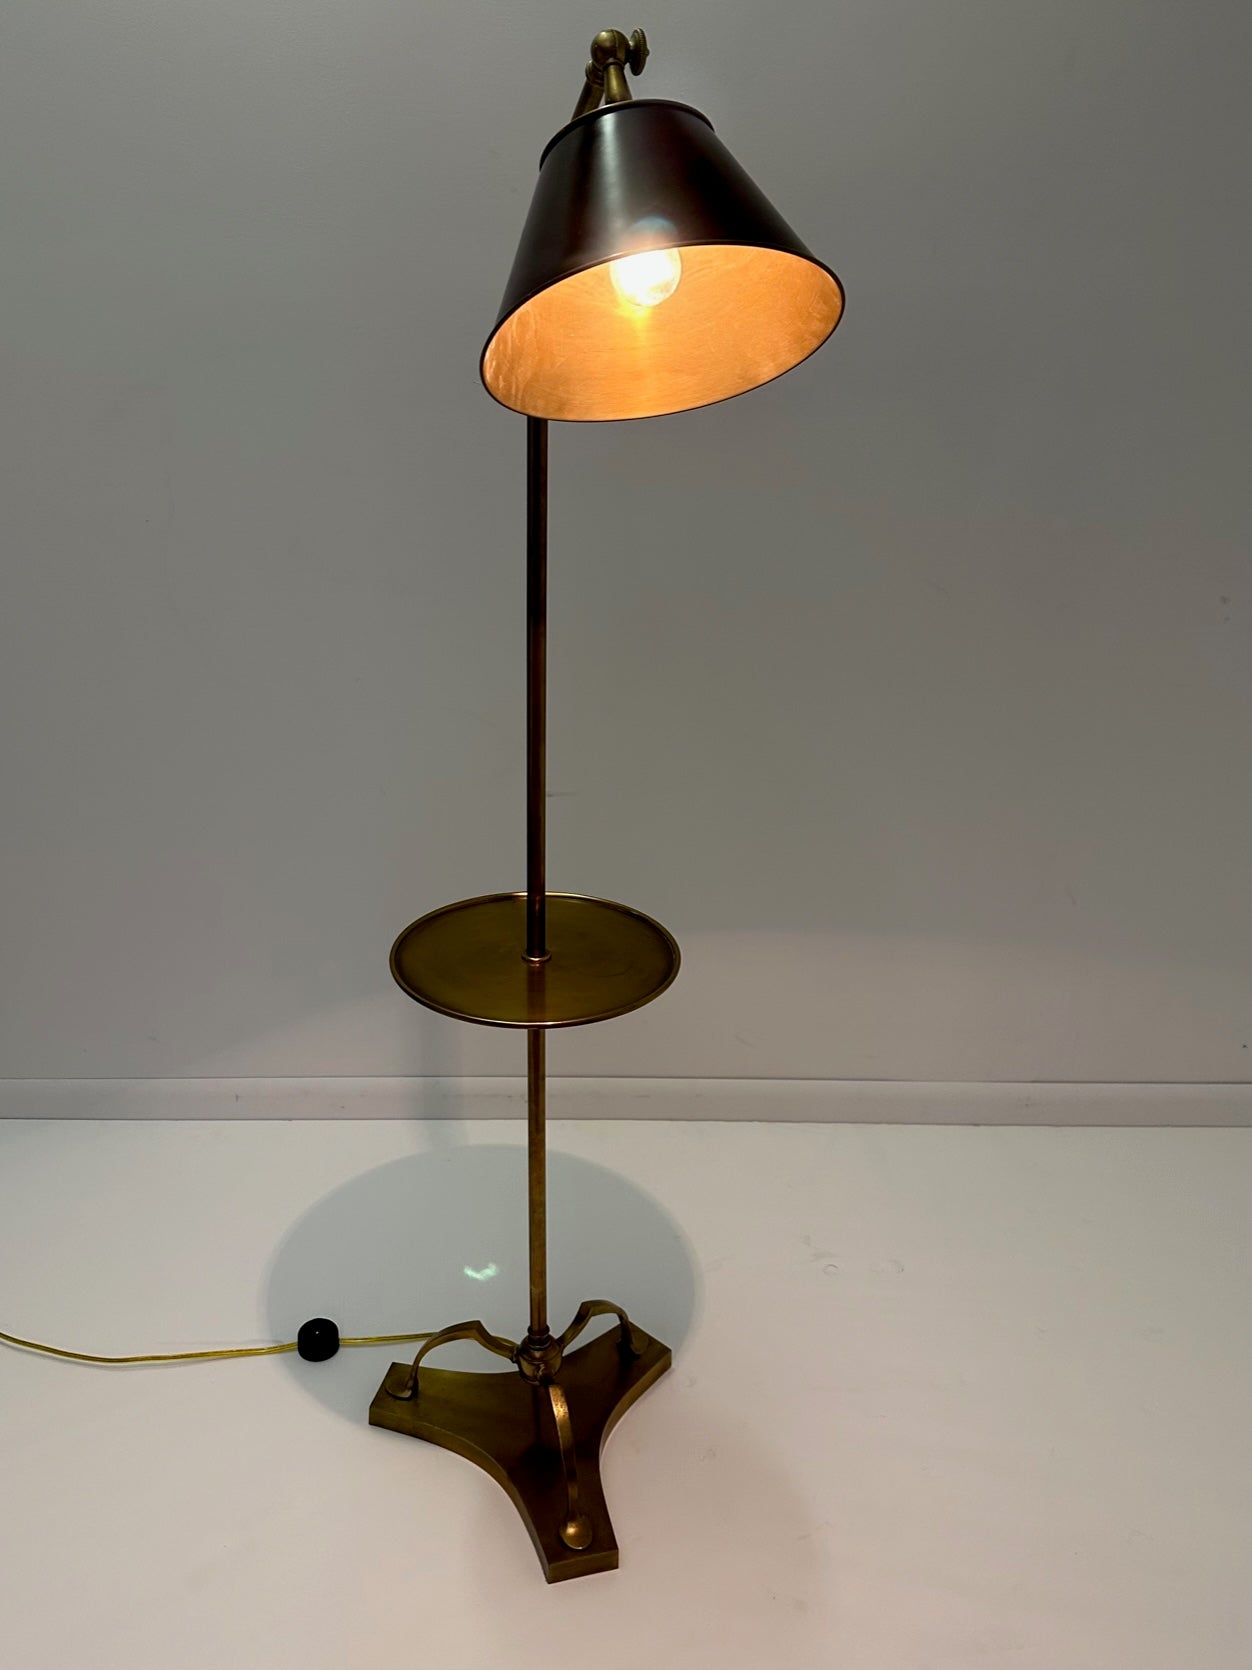 Handsome Chapman solid brass floor lamp having ebonized black adjutable shade and round 11.5 diameter table.  Shade is 10